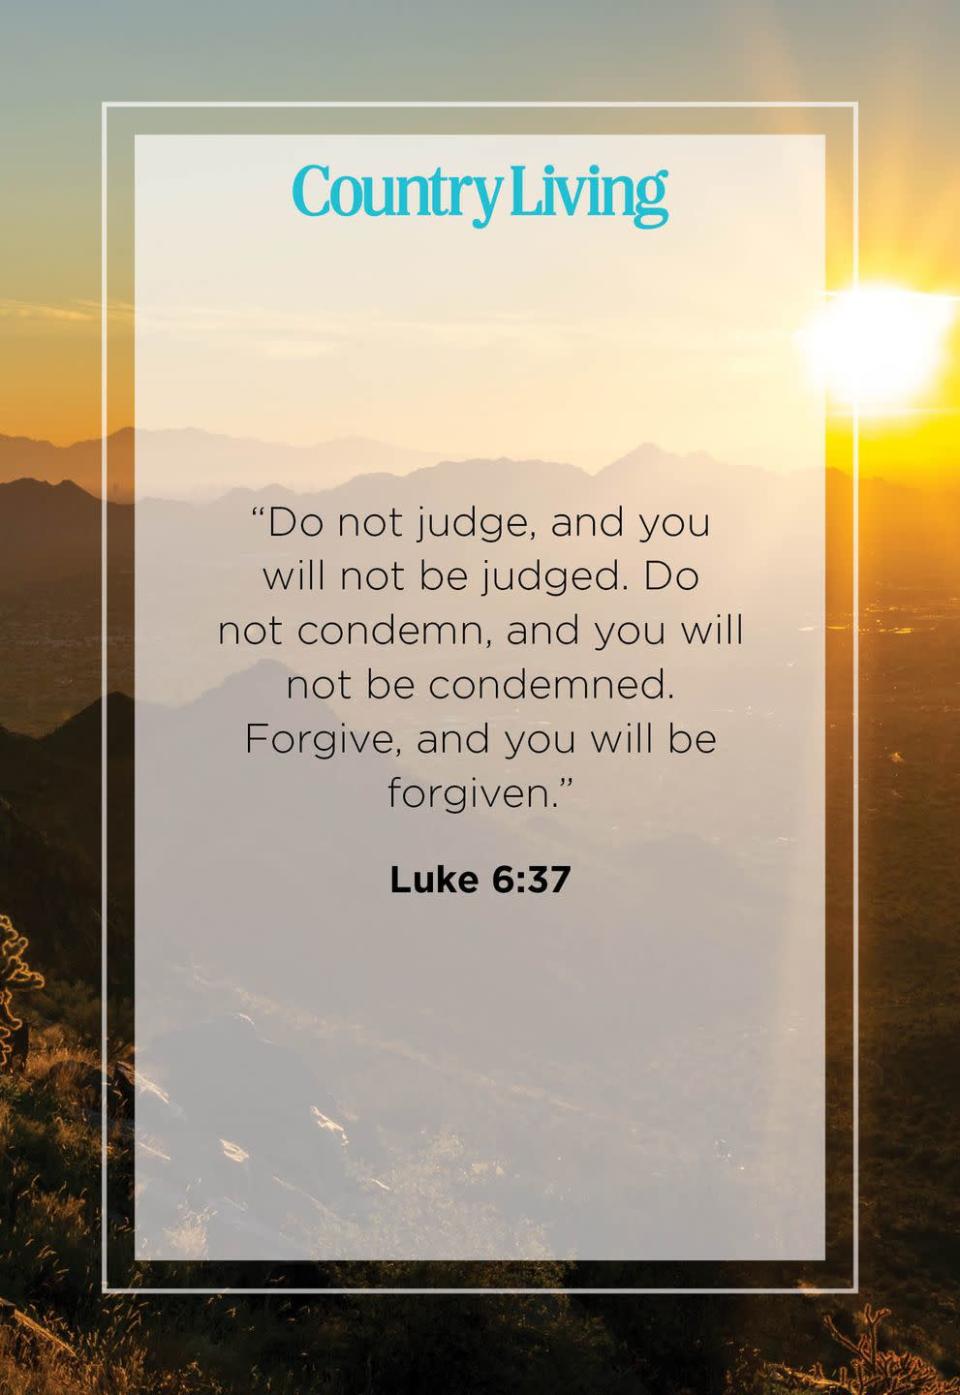 <p>“Do not judge, and you will not be judged. Do not condemn, and you will not be condemned. Forgive, and you will be forgiven.”</p>